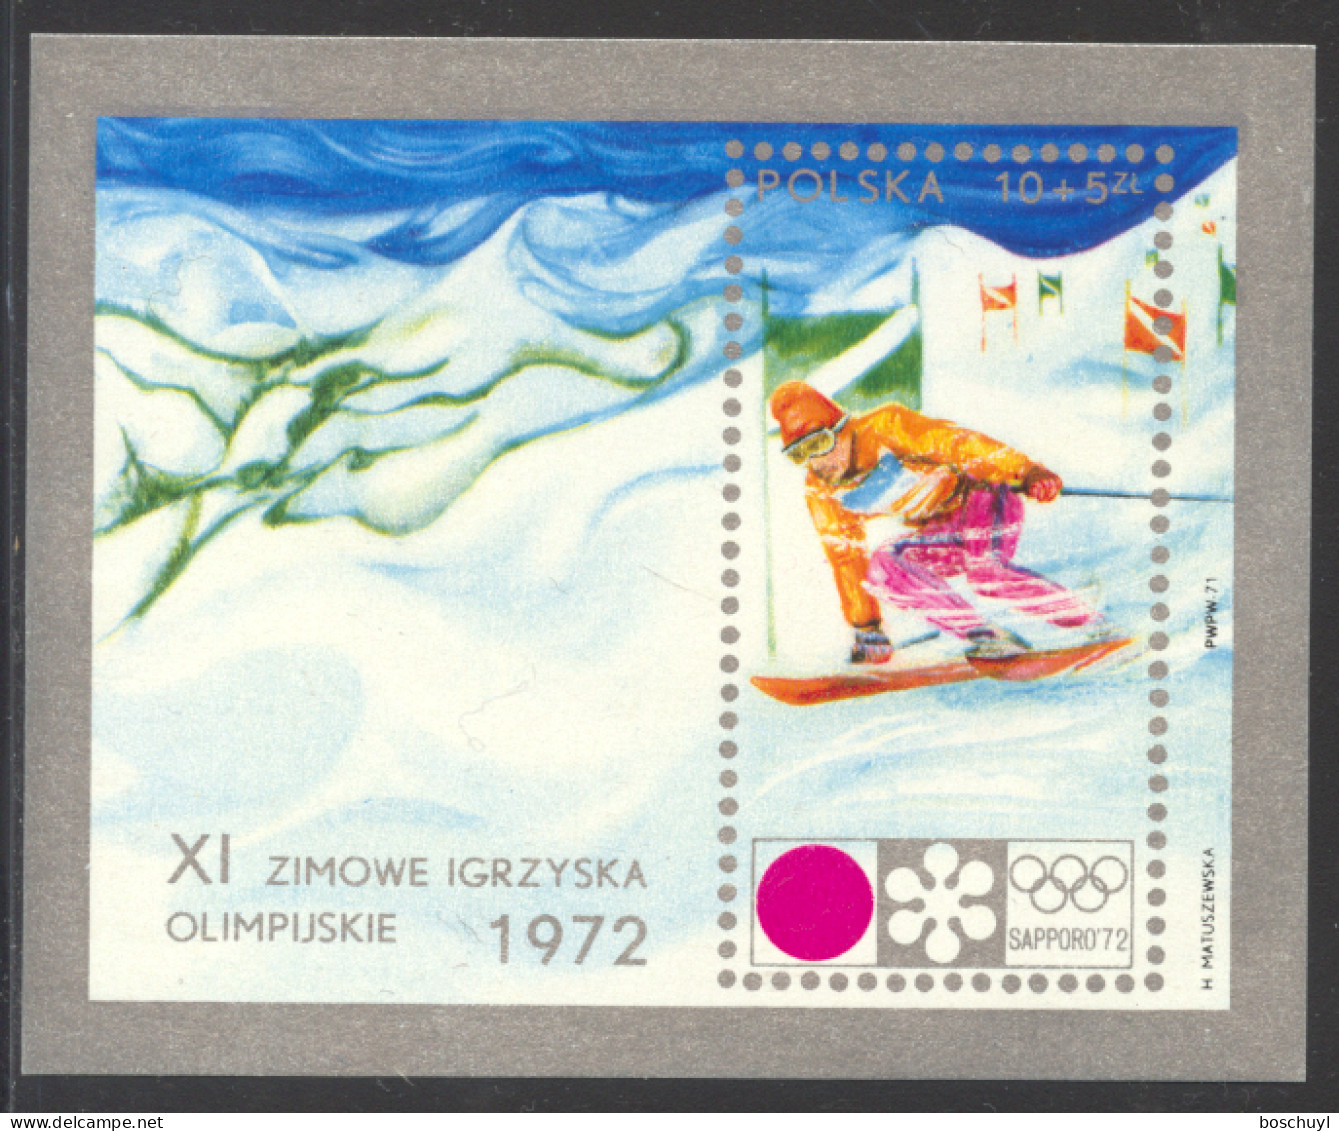 Poland, 1972, Olympic Winter Games Sapporo, Sports, Skiing, MNH, Michel Block 49 - Unused Stamps